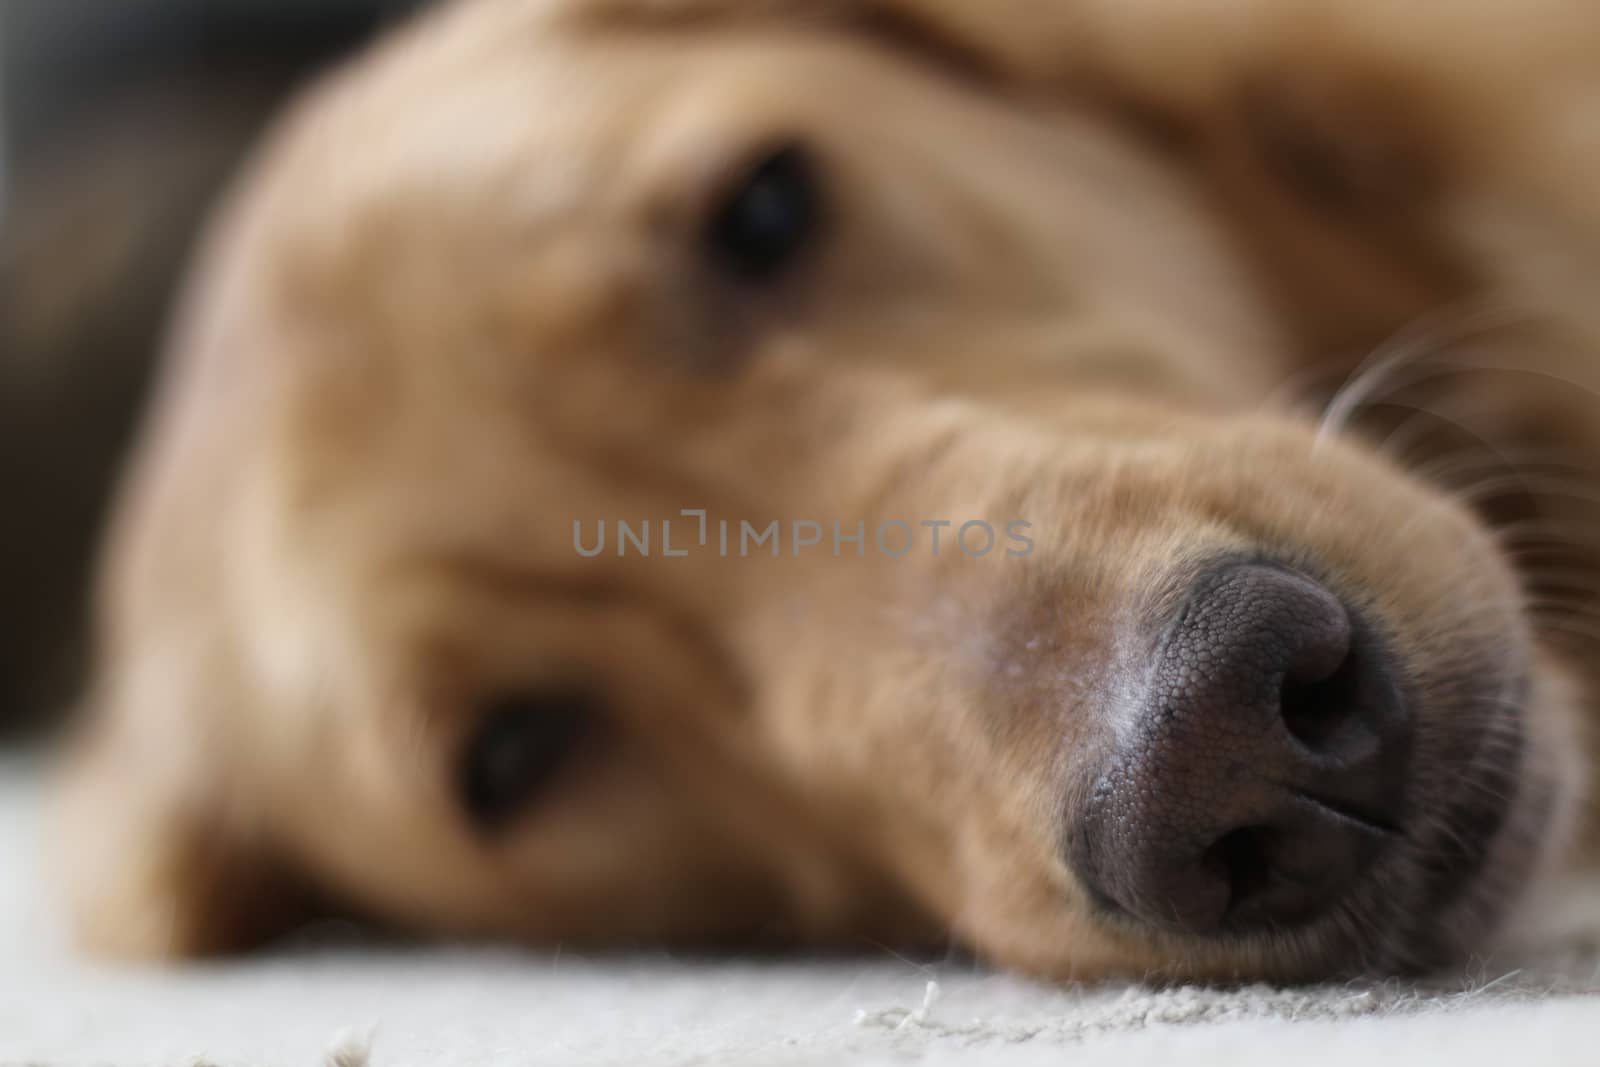 Focus on a Golden Retriever Dog Nose with Eyes Blurred